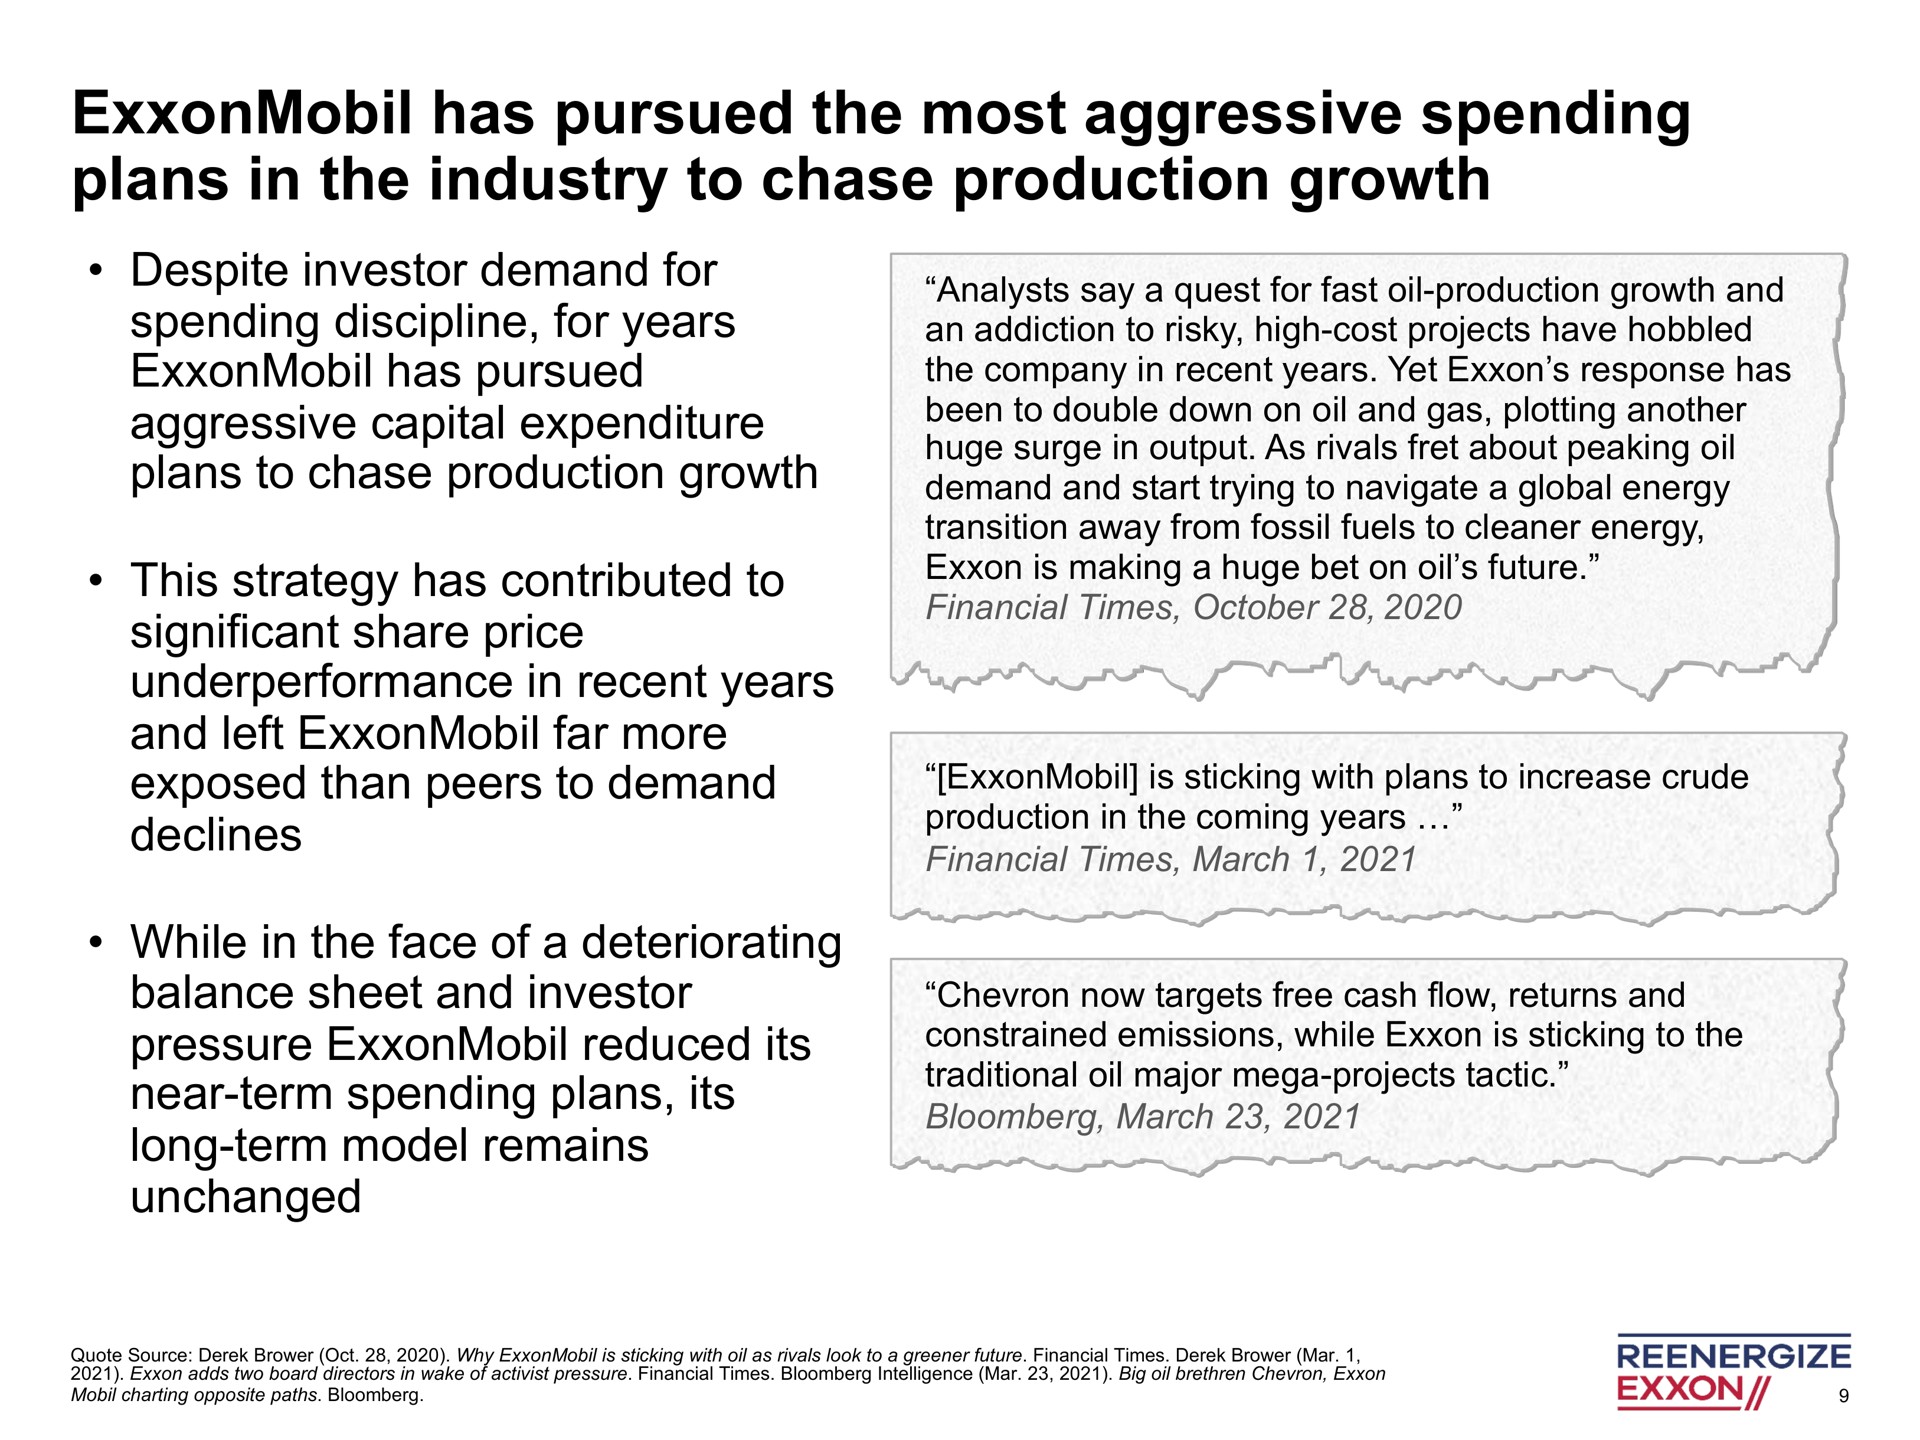 has pursued the most aggressive spending plans in the industry to chase production growth | Engine No. 1